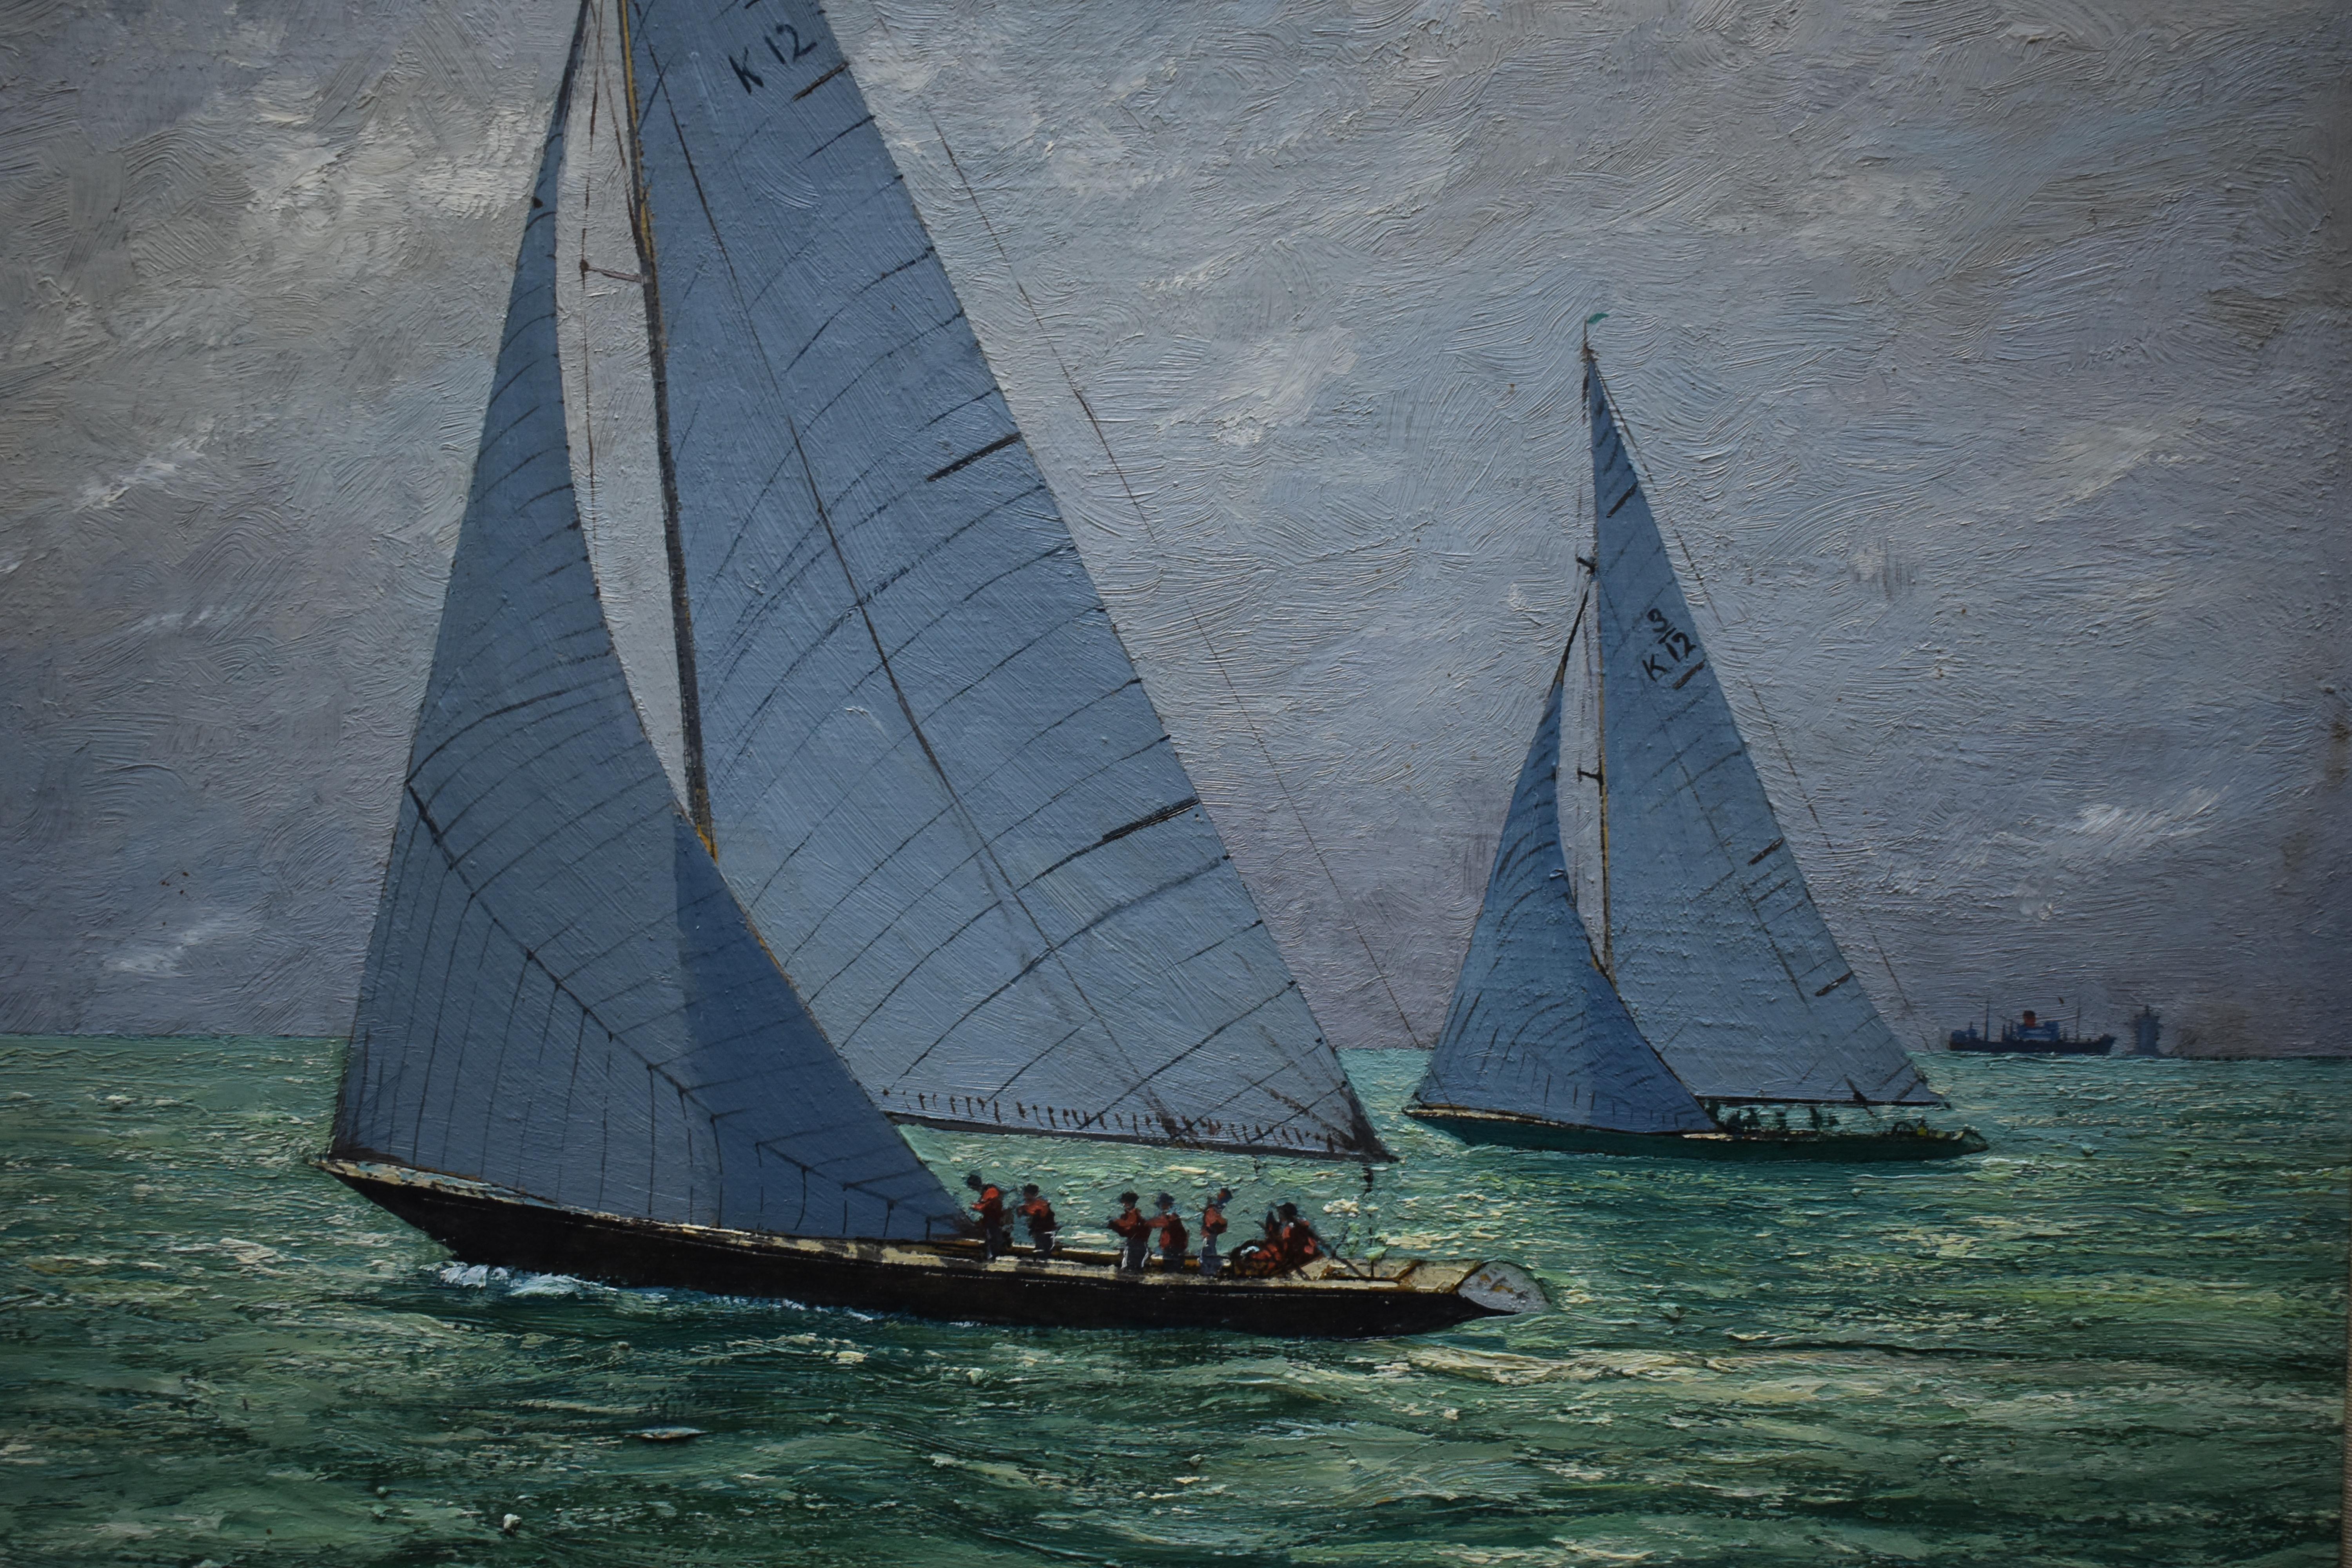 Claude MUNCASTER (1903-1974) Sovereign and Kurrewa America’s Cup Interest Oil Painting

A sparkling depiction of the yachts Sovereign and Kurrewa in the 12 meter trial to determine the cup challenger. 

Inscribed verso:
Rough Sketch
 “Sovereign and